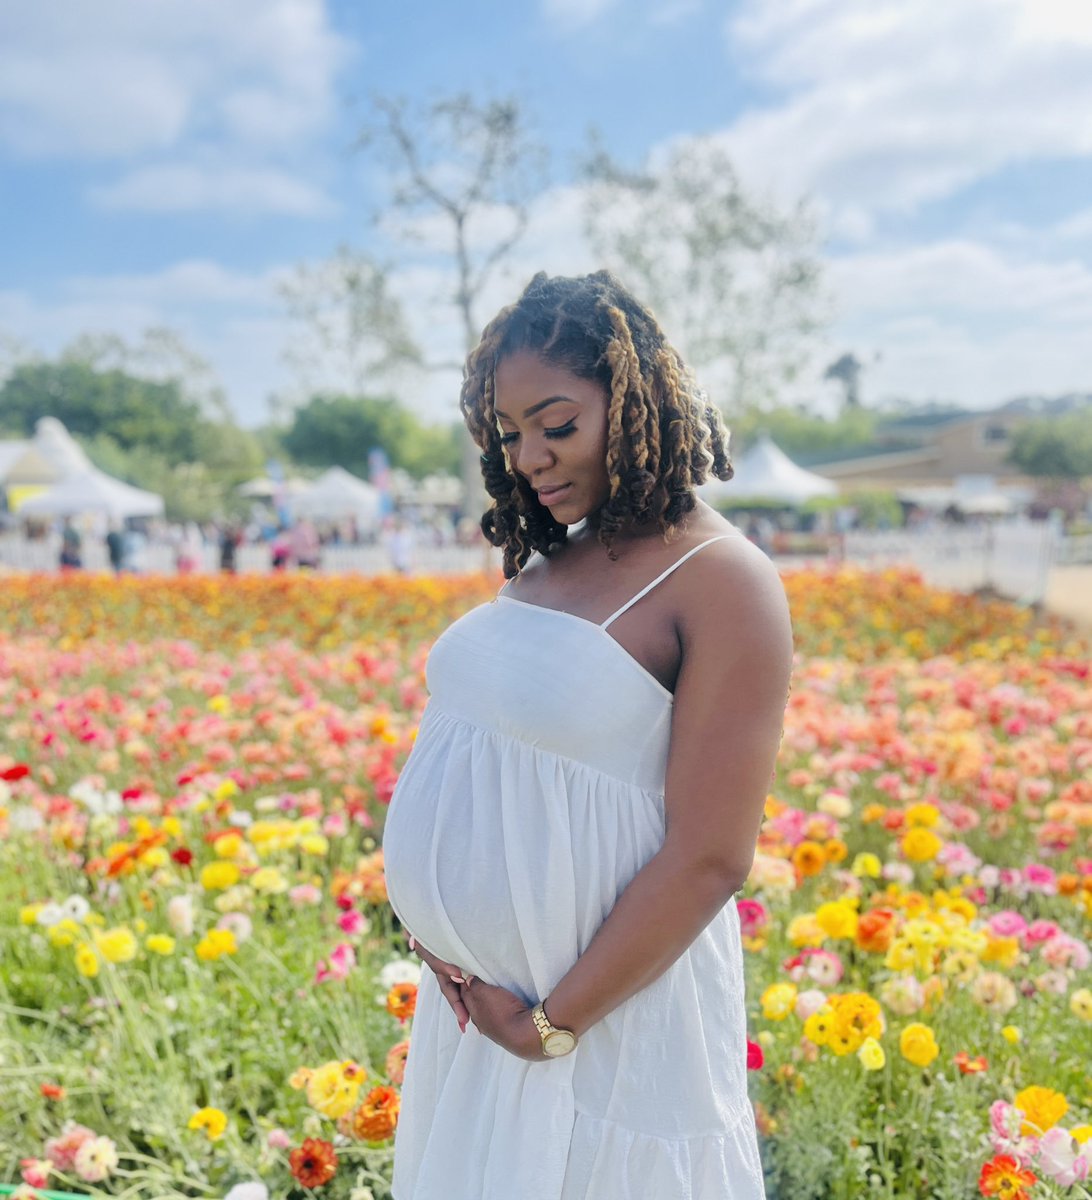 I’m getting everything I want during this pregnancy journey🙌🤰🏽and it has been a blessing to receive these manifestations unfold - it’s just one thing left on my list and I think God got that one 🙏 #faithoverfear